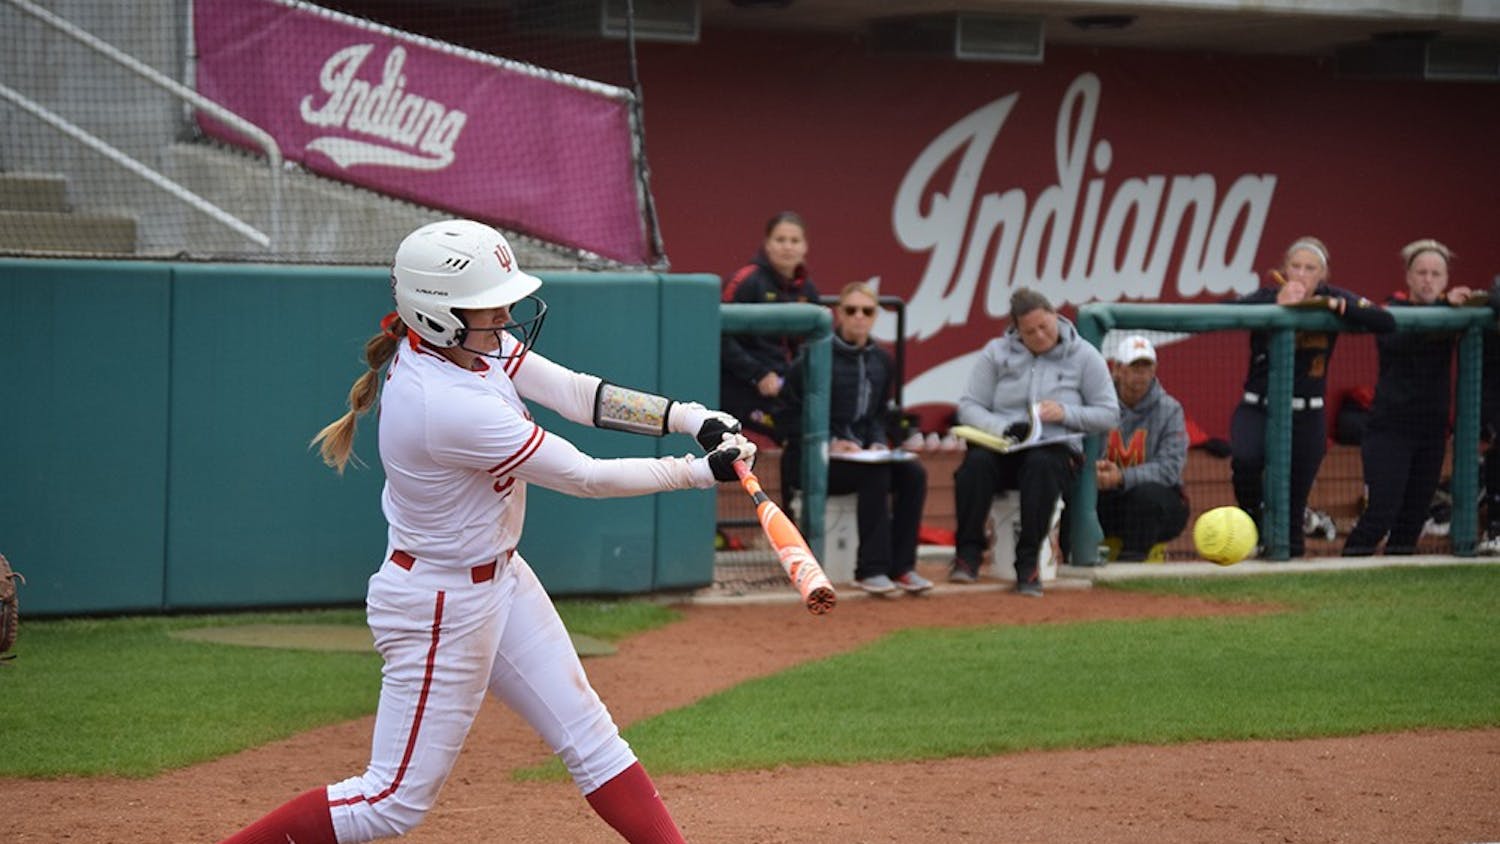 Senior Erin Lehman hits the ball in the second game against Maryland on Friday, April 21, 2017. The Hoosiers swept the Terrapins in the weekend series.